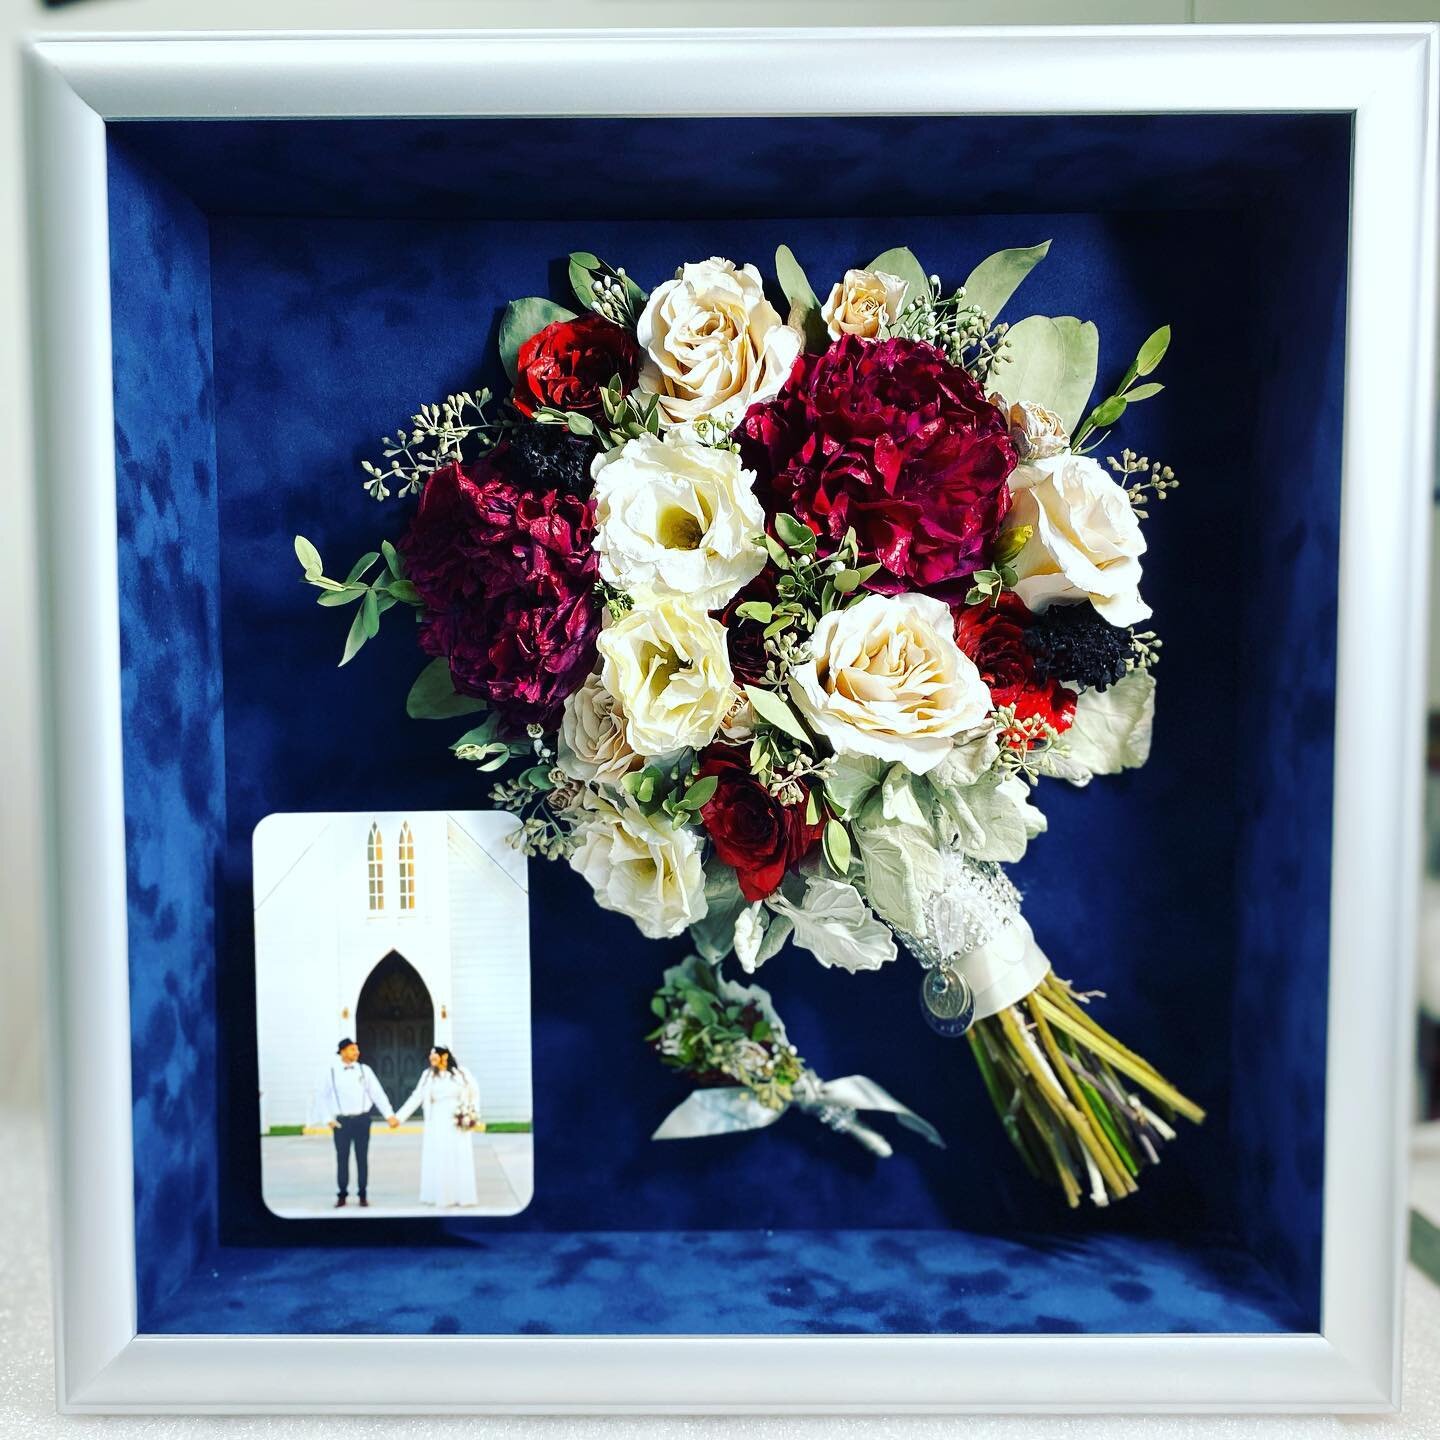 The Reds Whites and Blues!  Bam!  I love how they are looking at each other in the photo.  #weddingkeepsake #preservedbridalbouquet #weddingshadowbox #socalbridestobe #socalwedding